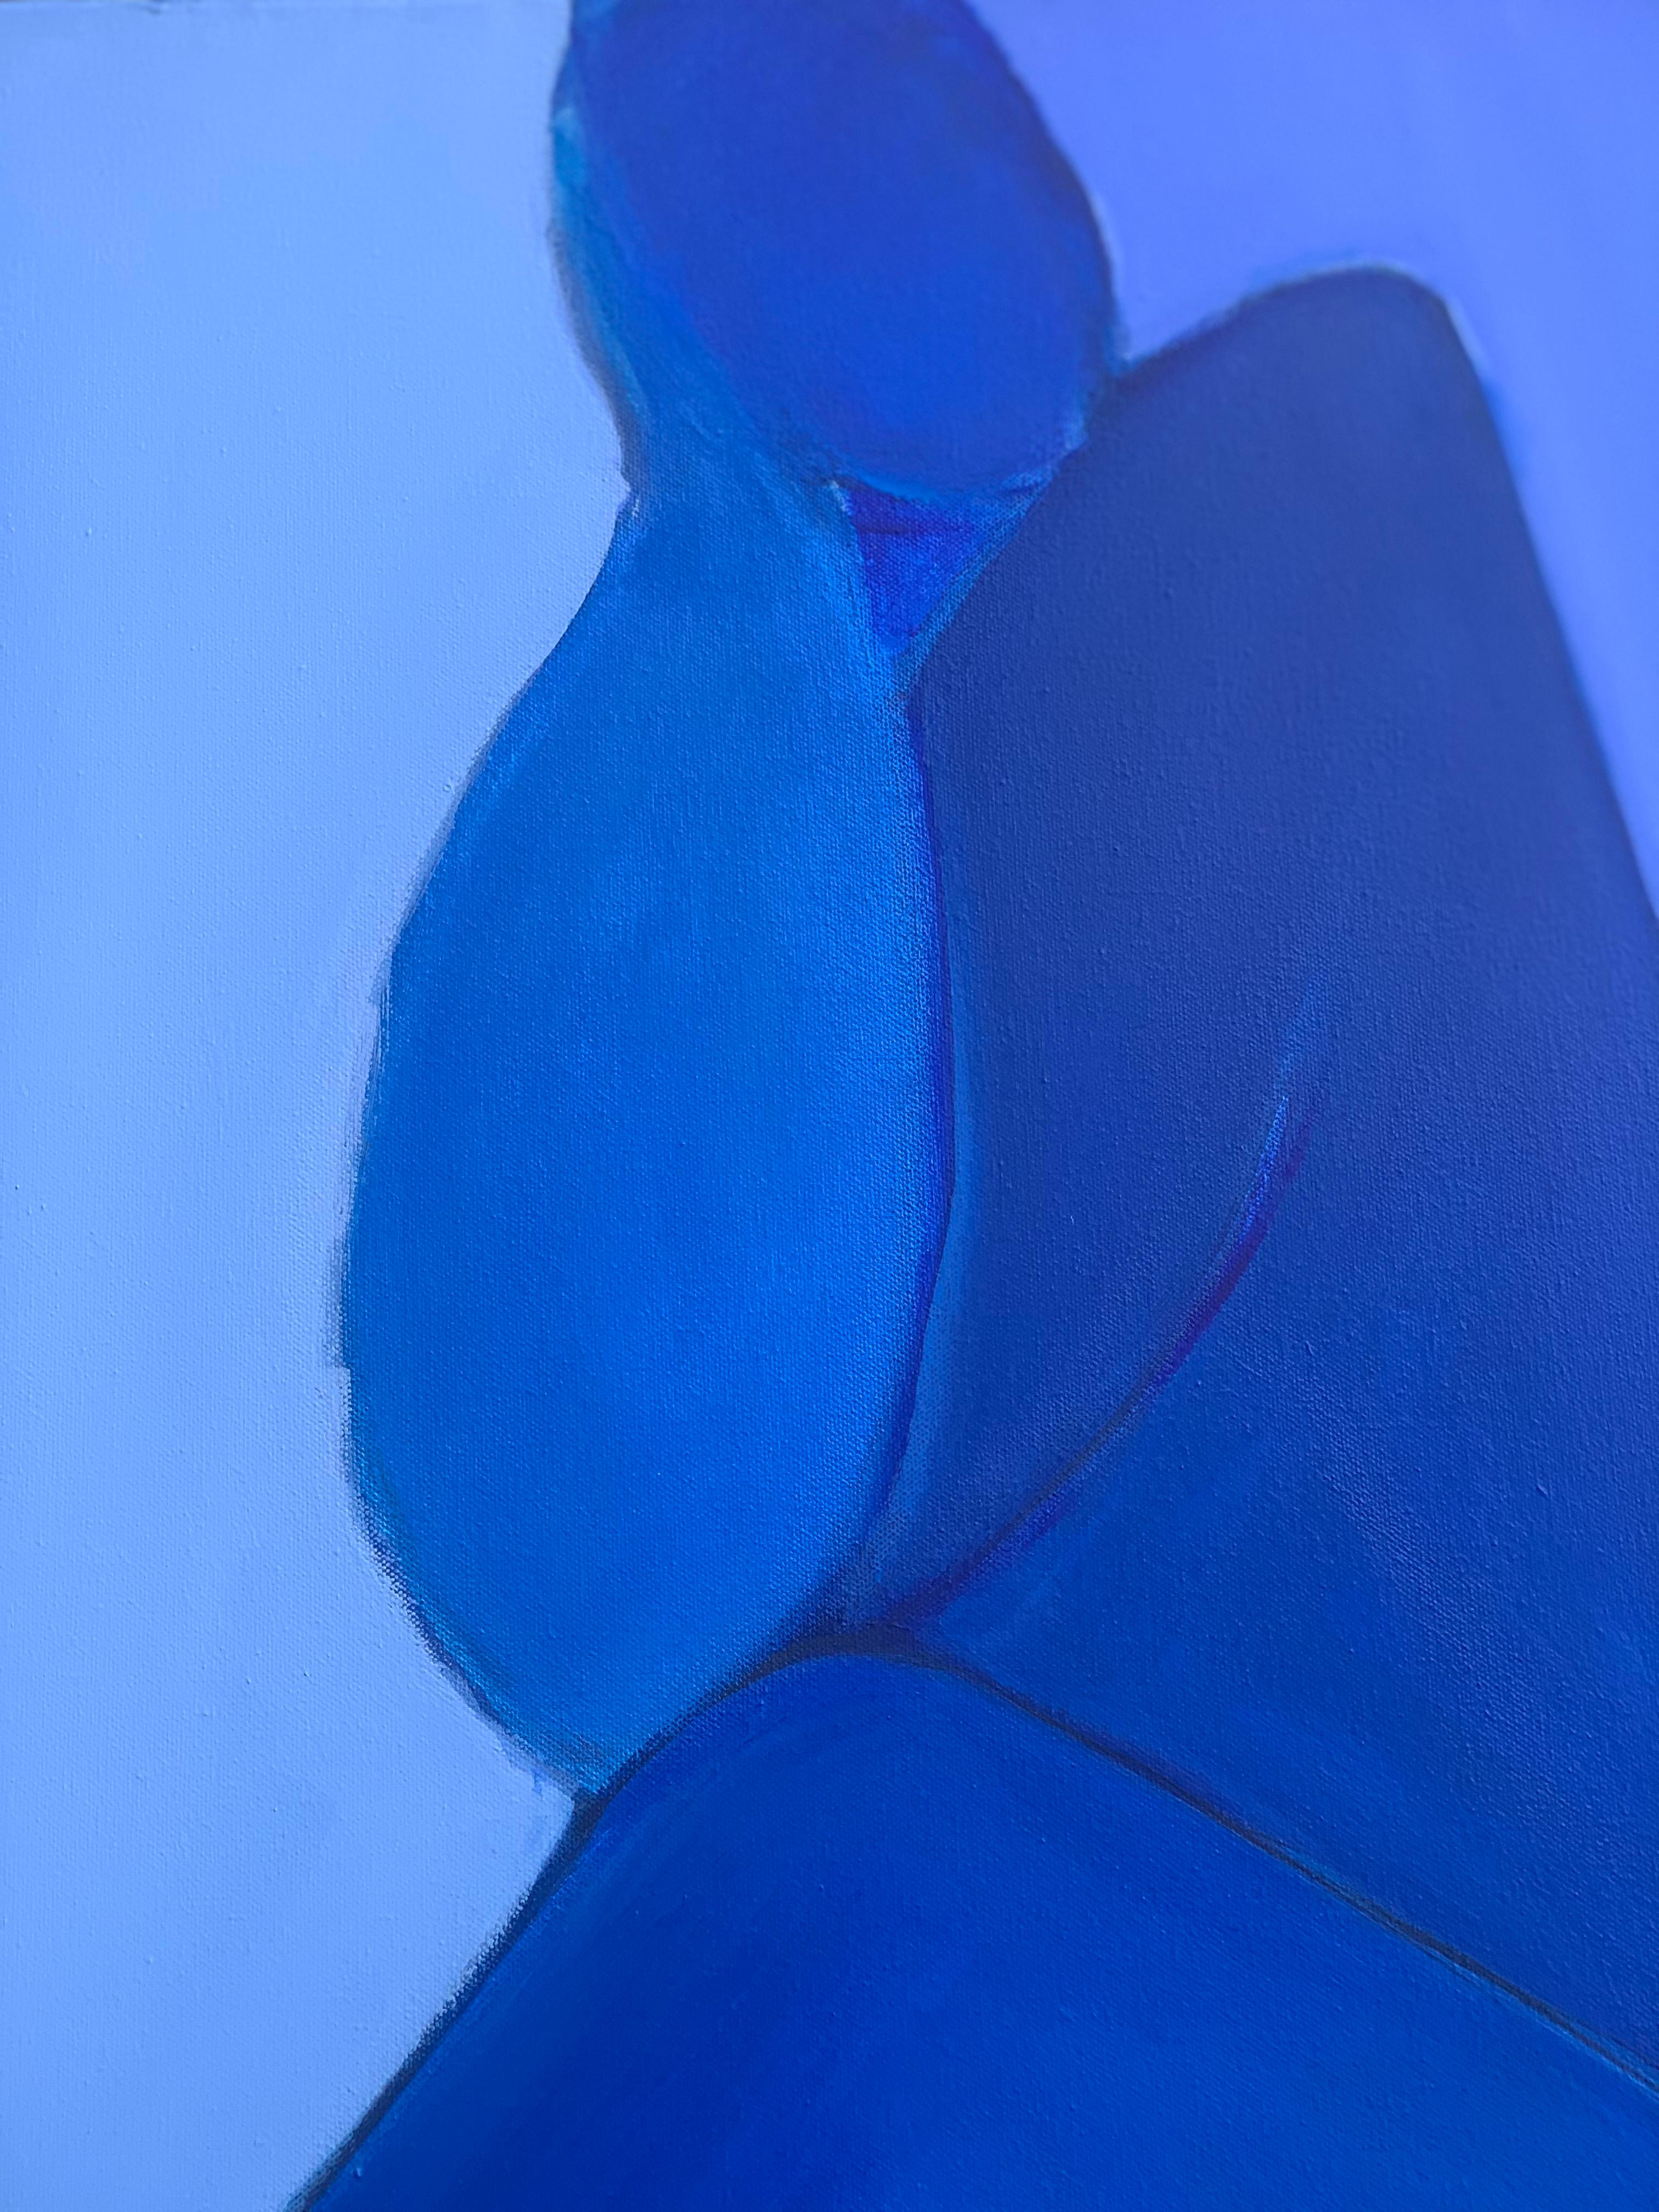 <p>Artist Comments<br>Artist Robin Okun paints a sensitive and evocative modernist figure in subtle variations of warm blue. A contemplative woman in the nude, sitting with her legs crossed. 